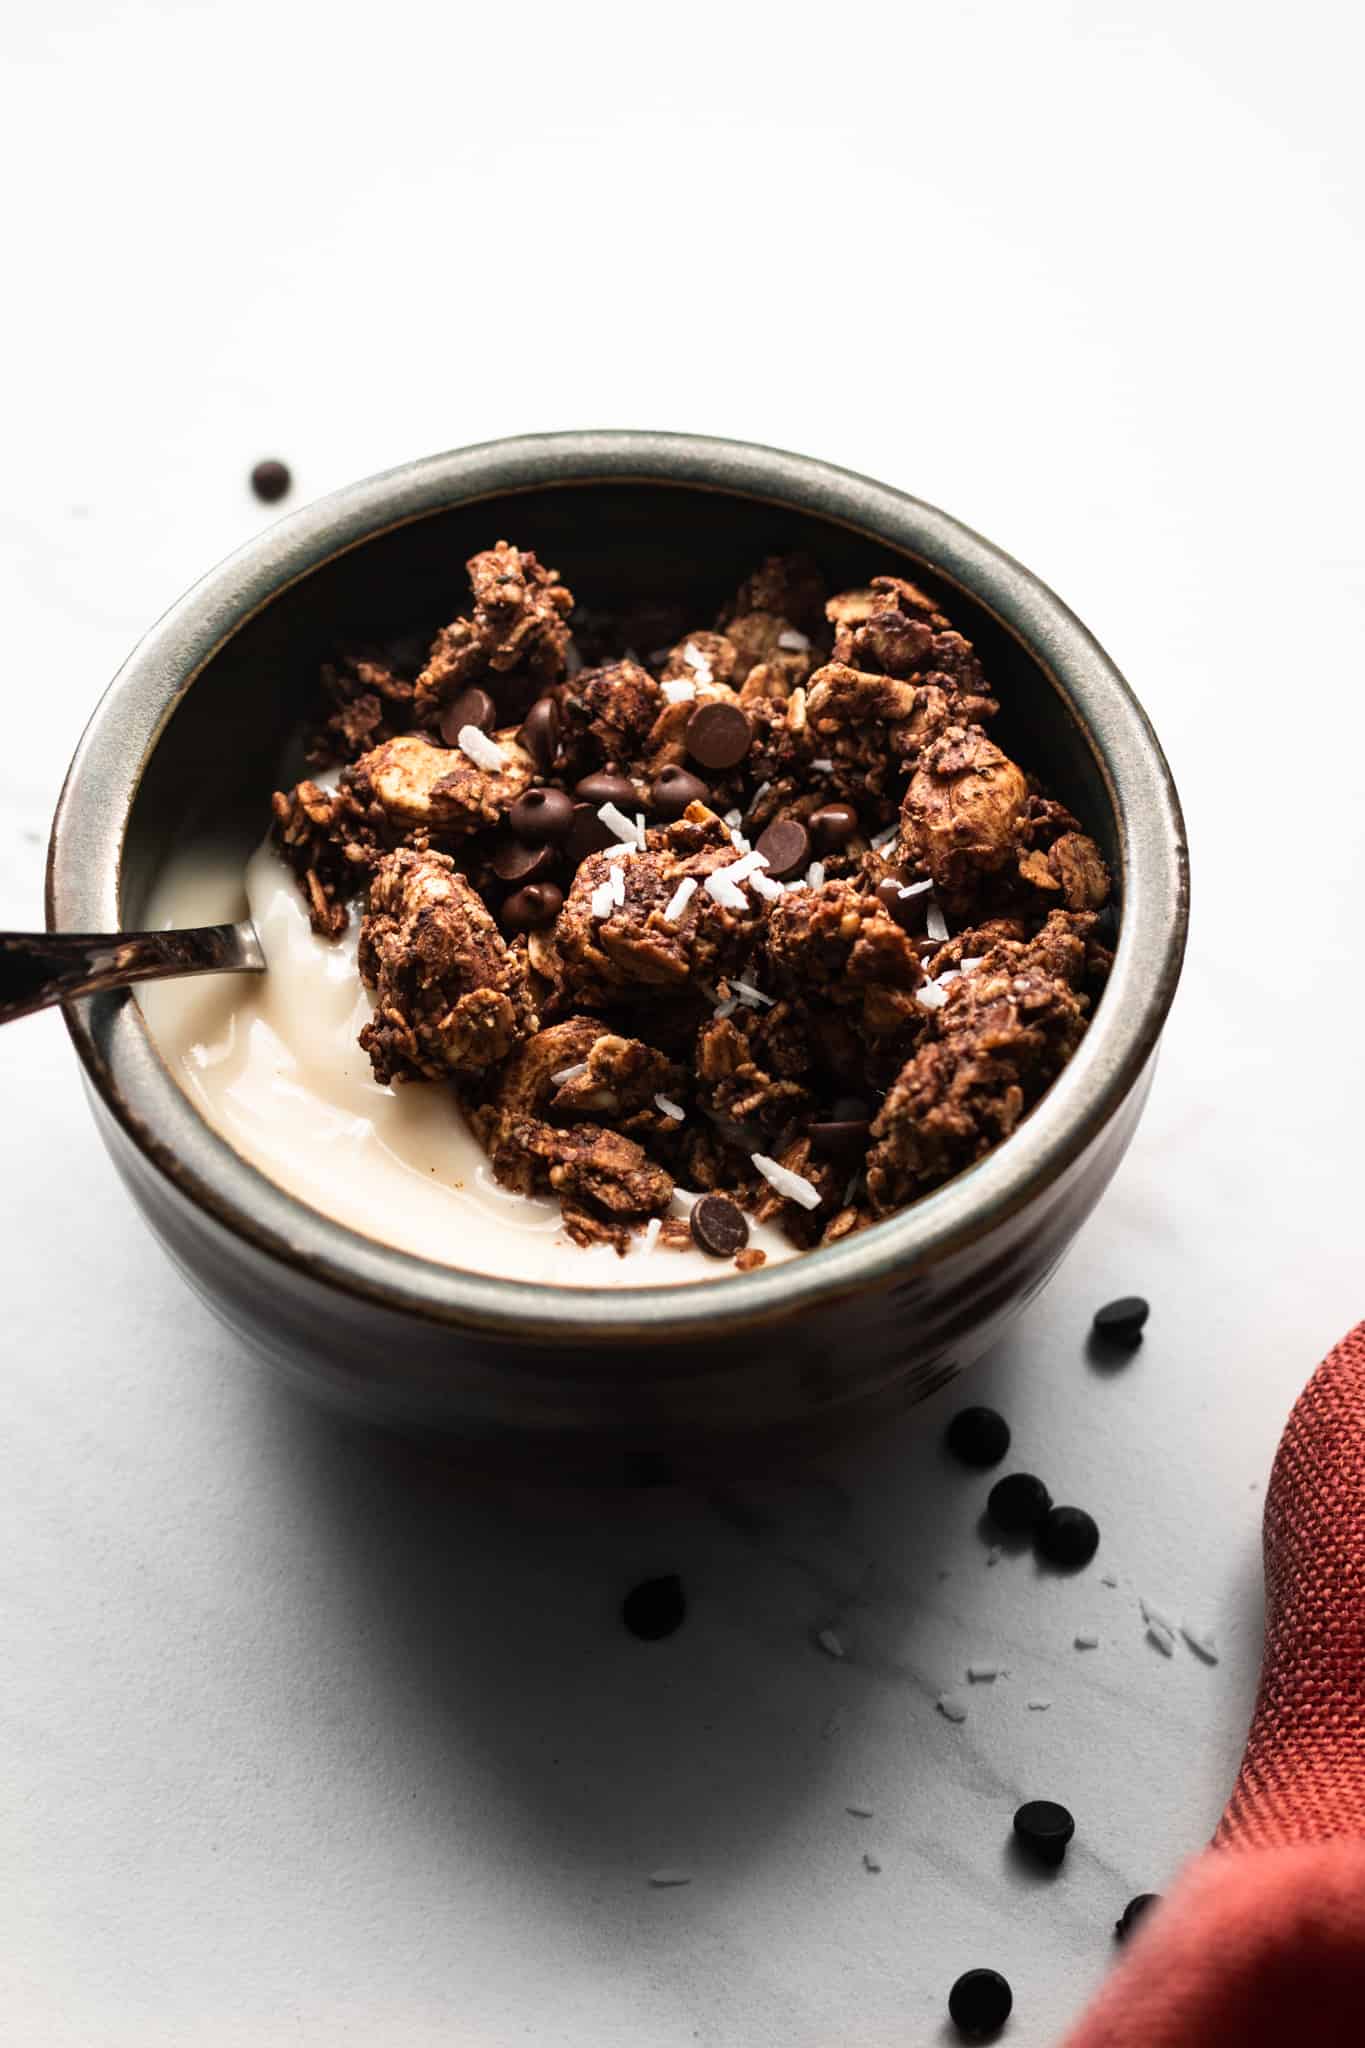 bowl of chocolate coconut granola and yogurt from the side